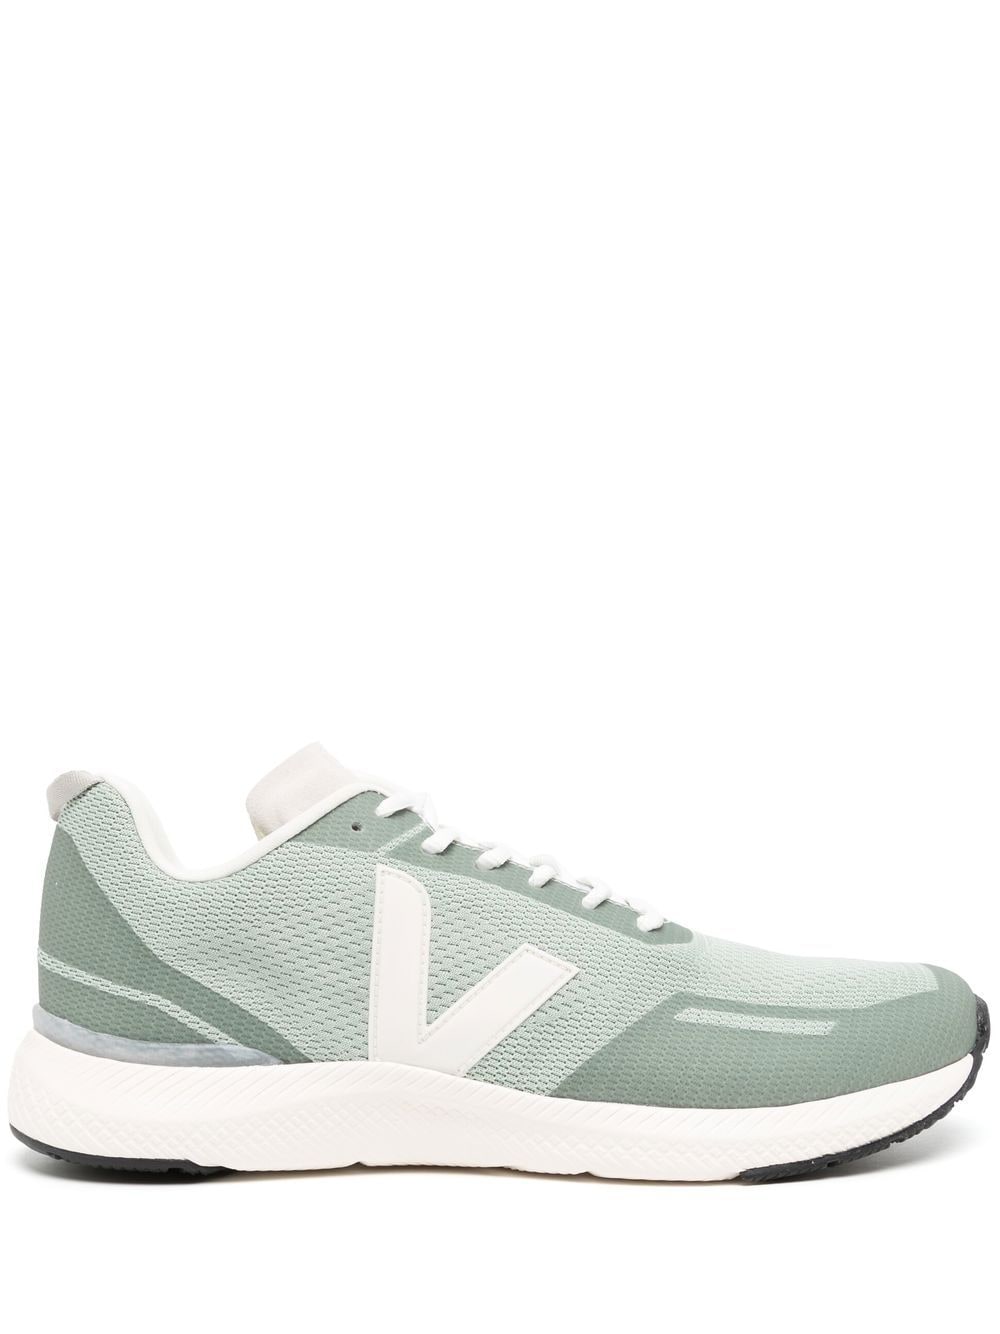 VEJA Impala lace-up sneakers - Green